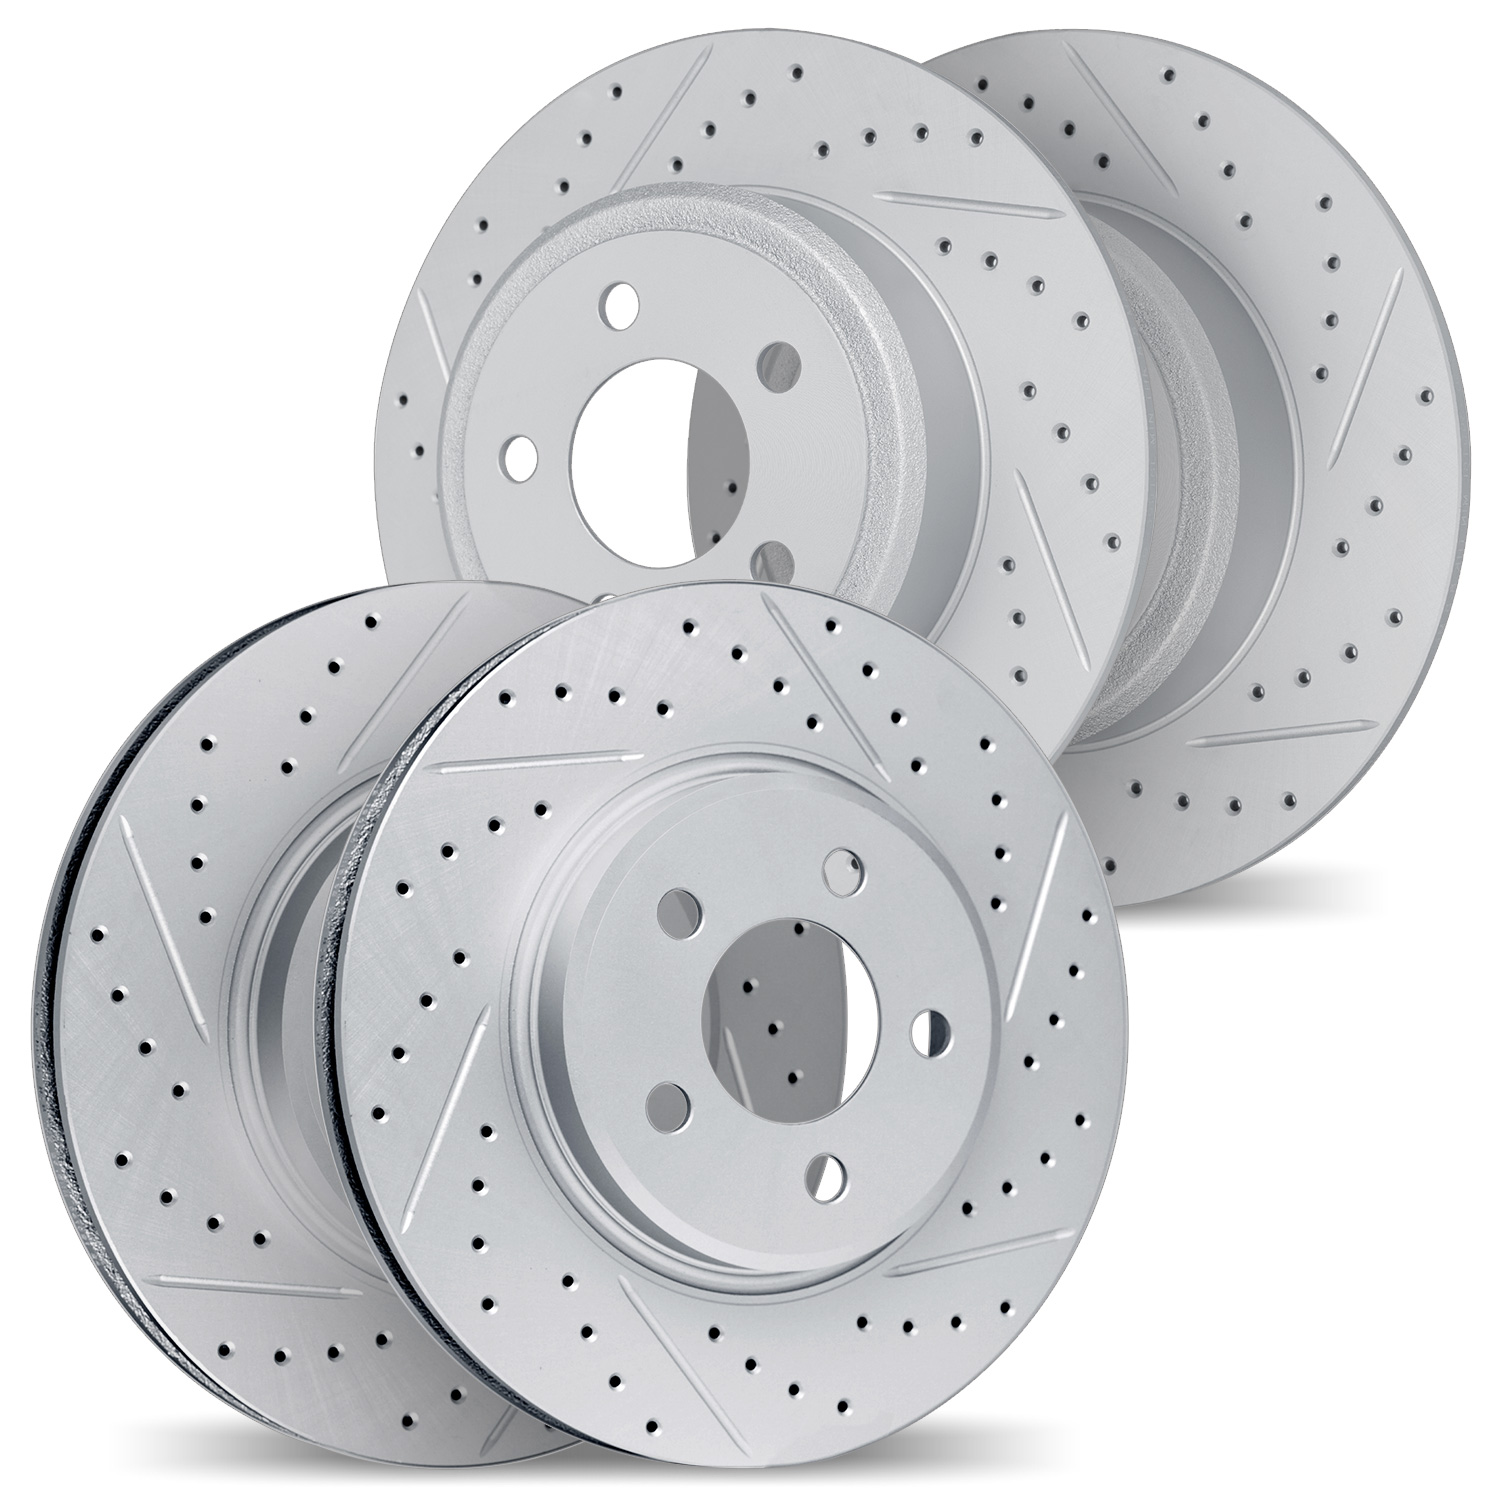 2004-59013 Geoperformance Drilled/Slotted Brake Rotors, 2007-2015 Acura/Honda, Position: Front and Rear